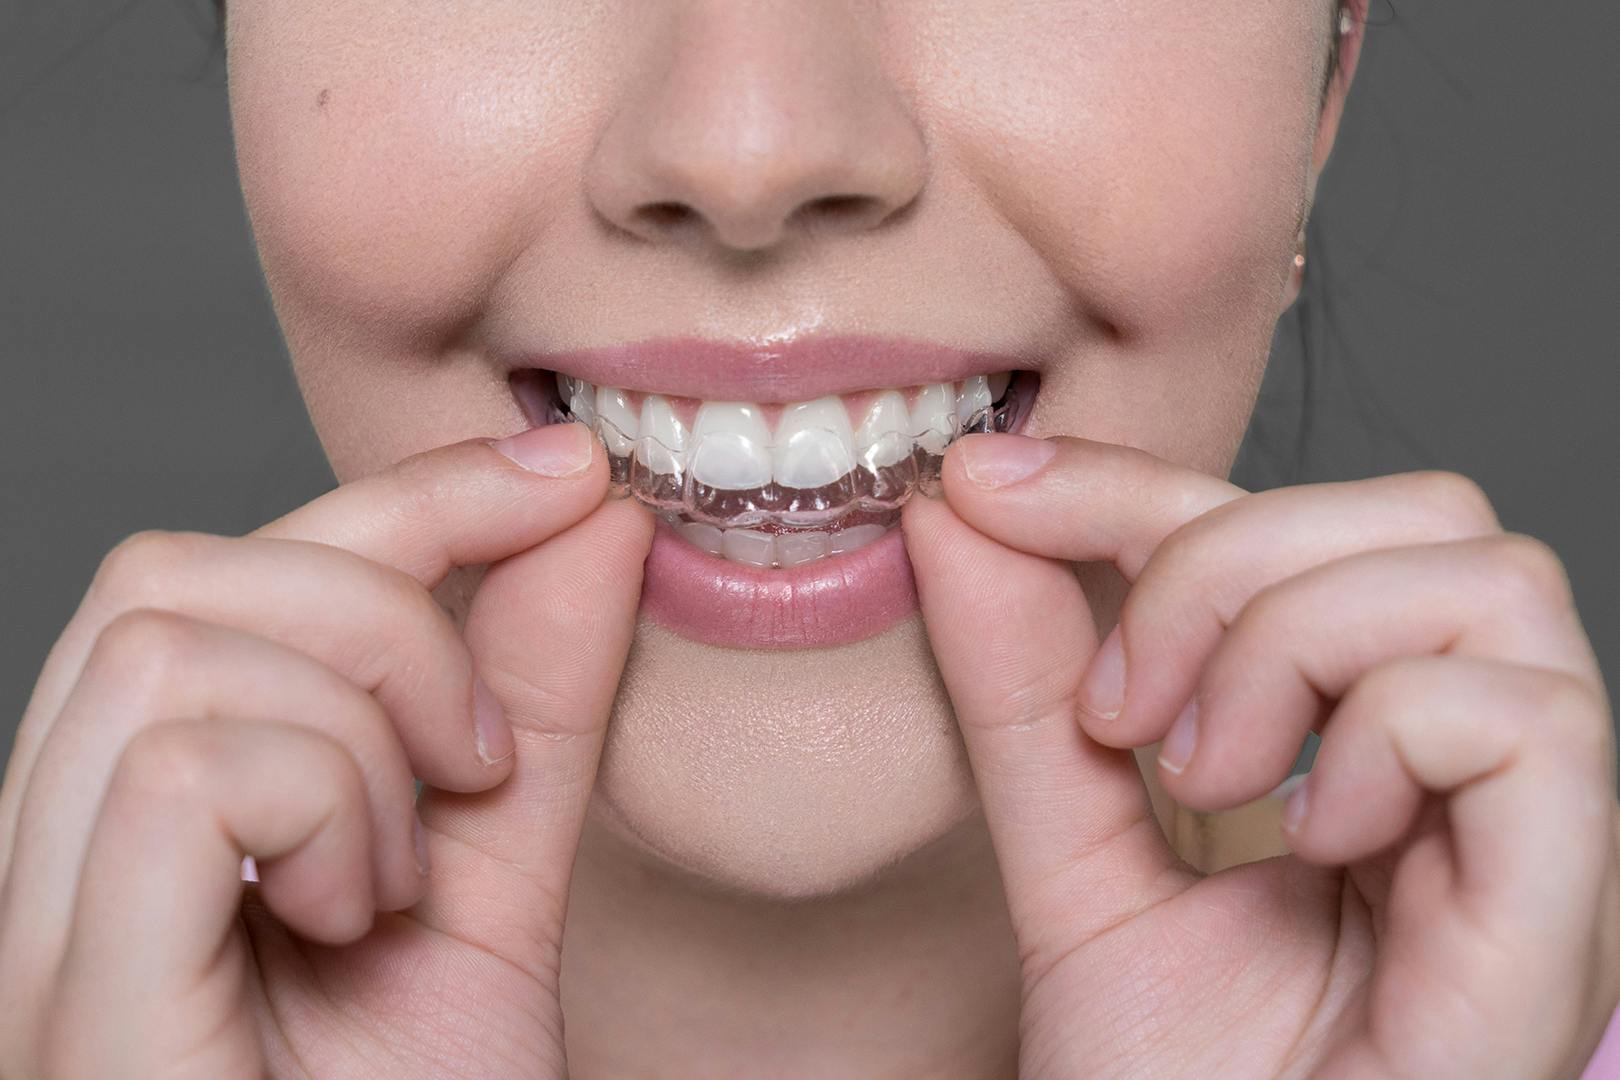 Woman holding Invisalign clear aligners up to her smile